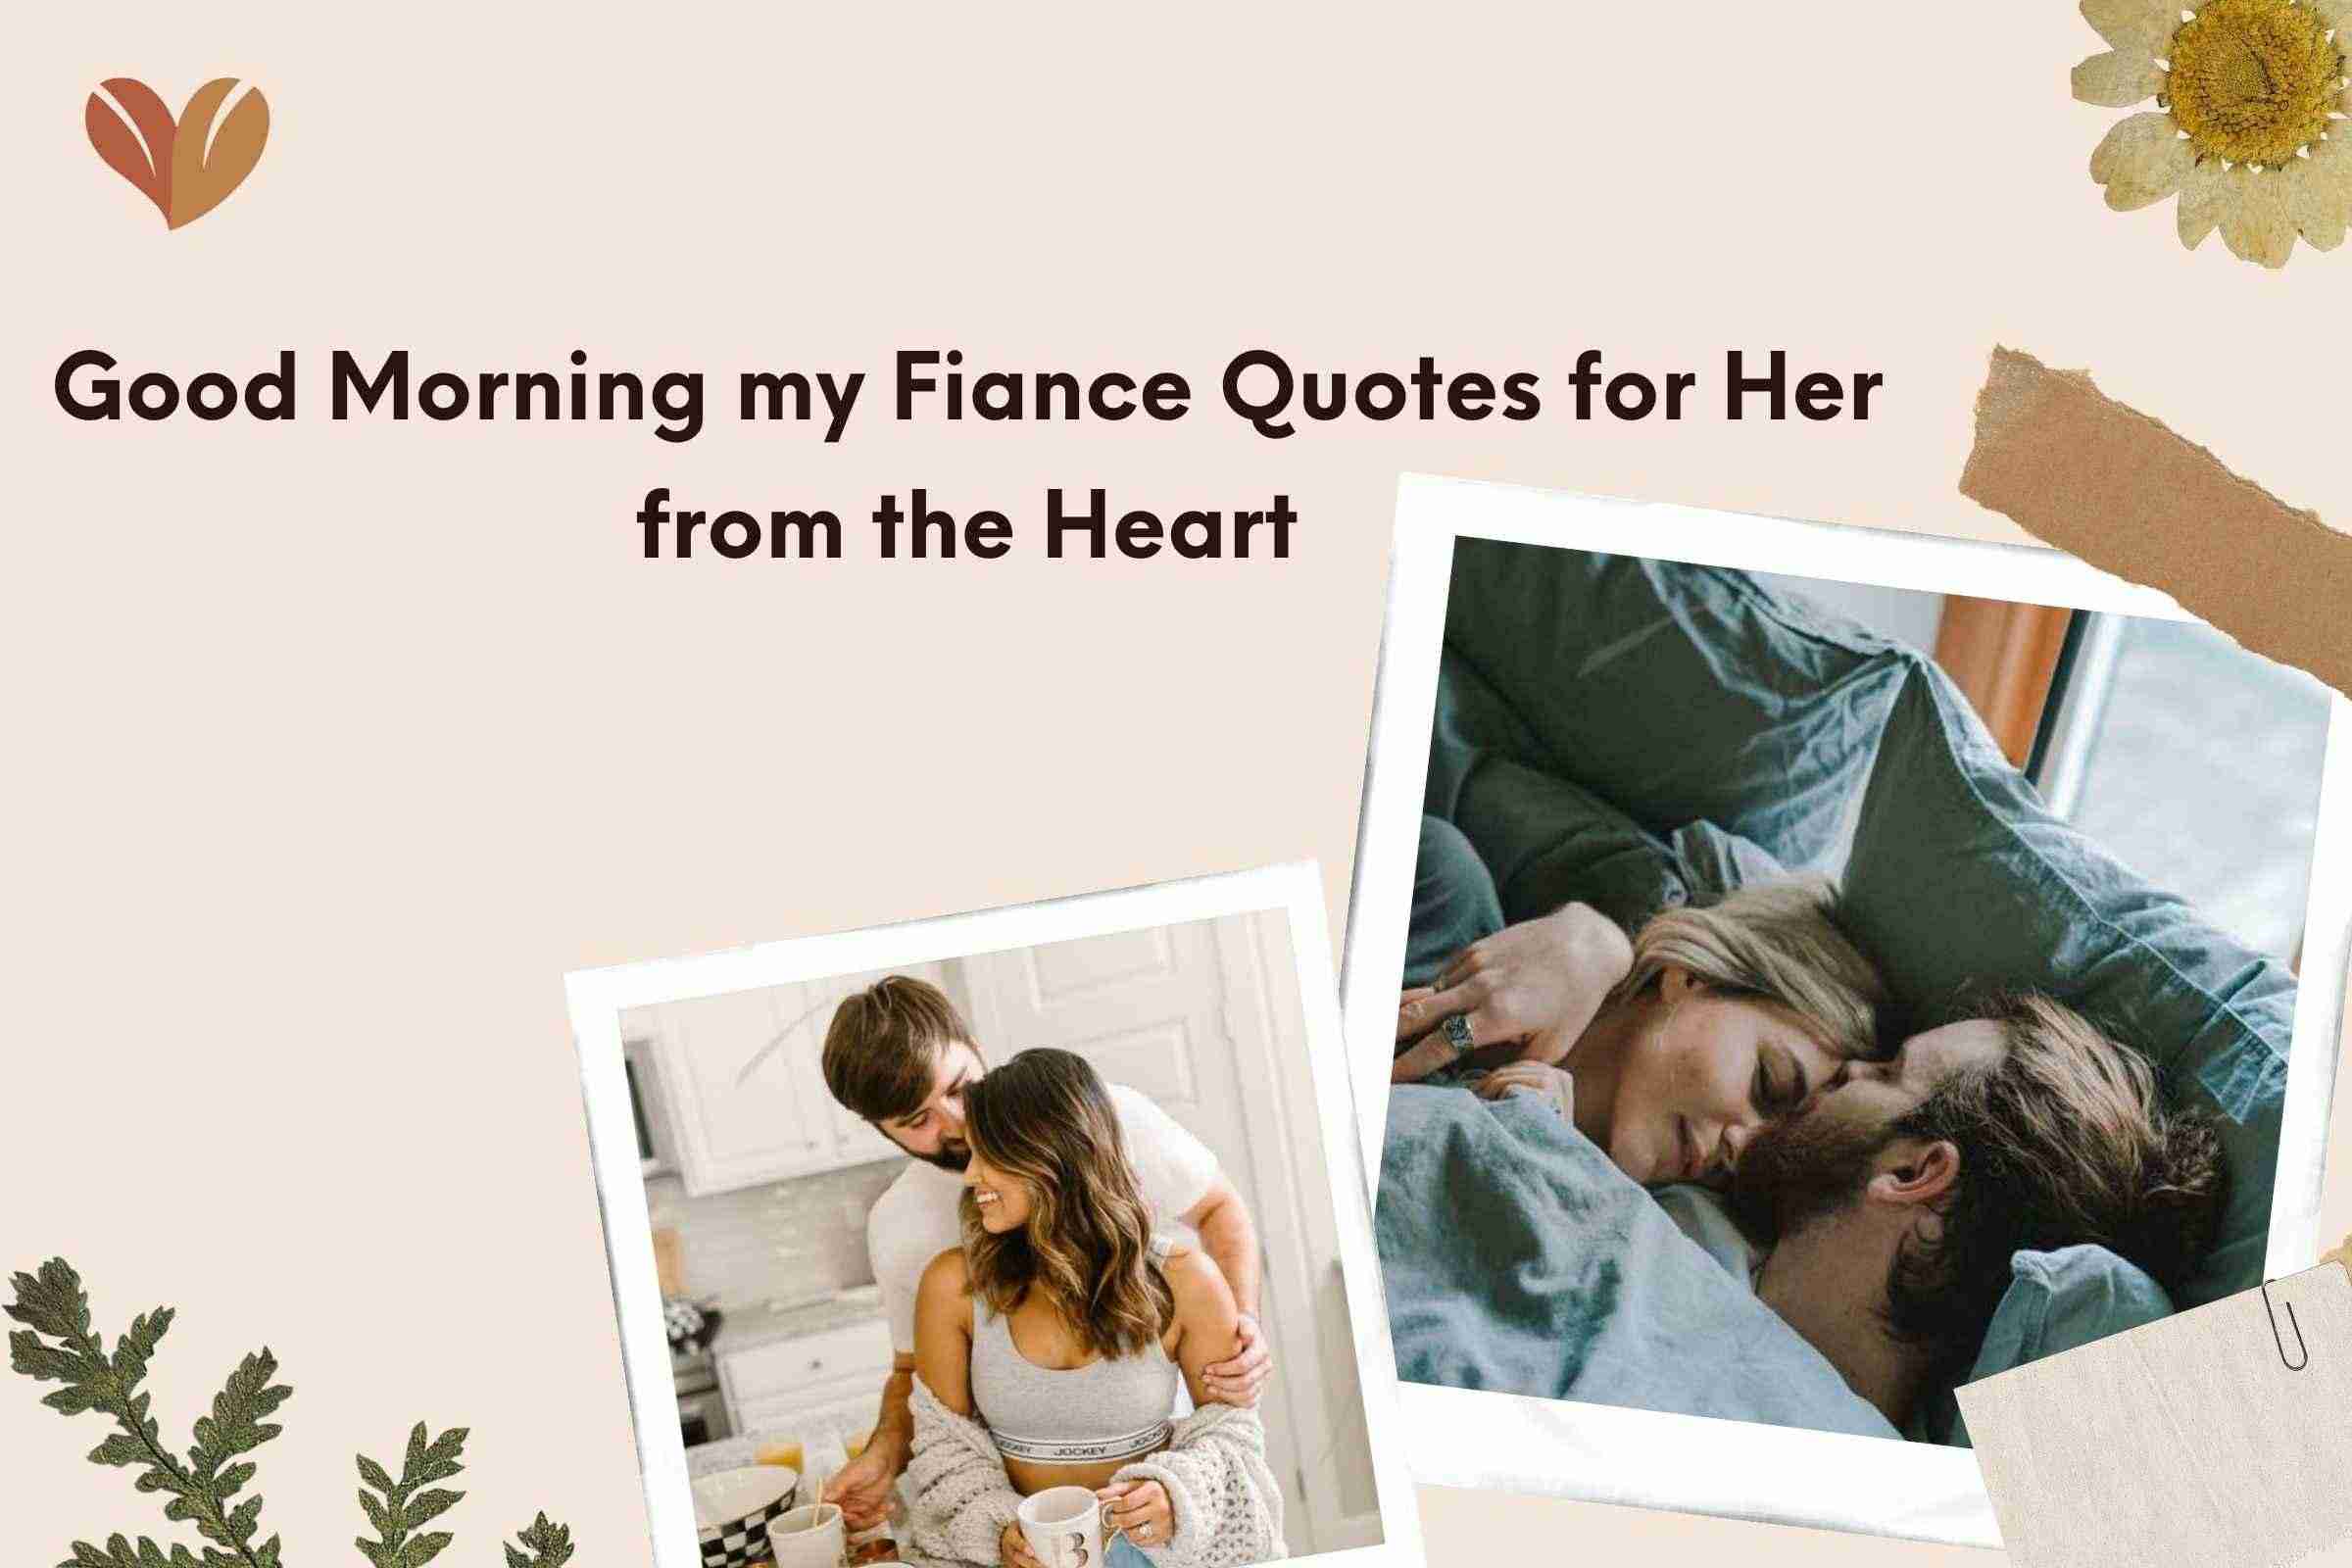 Good Morning my Fiance Quotes for Her from the Heart